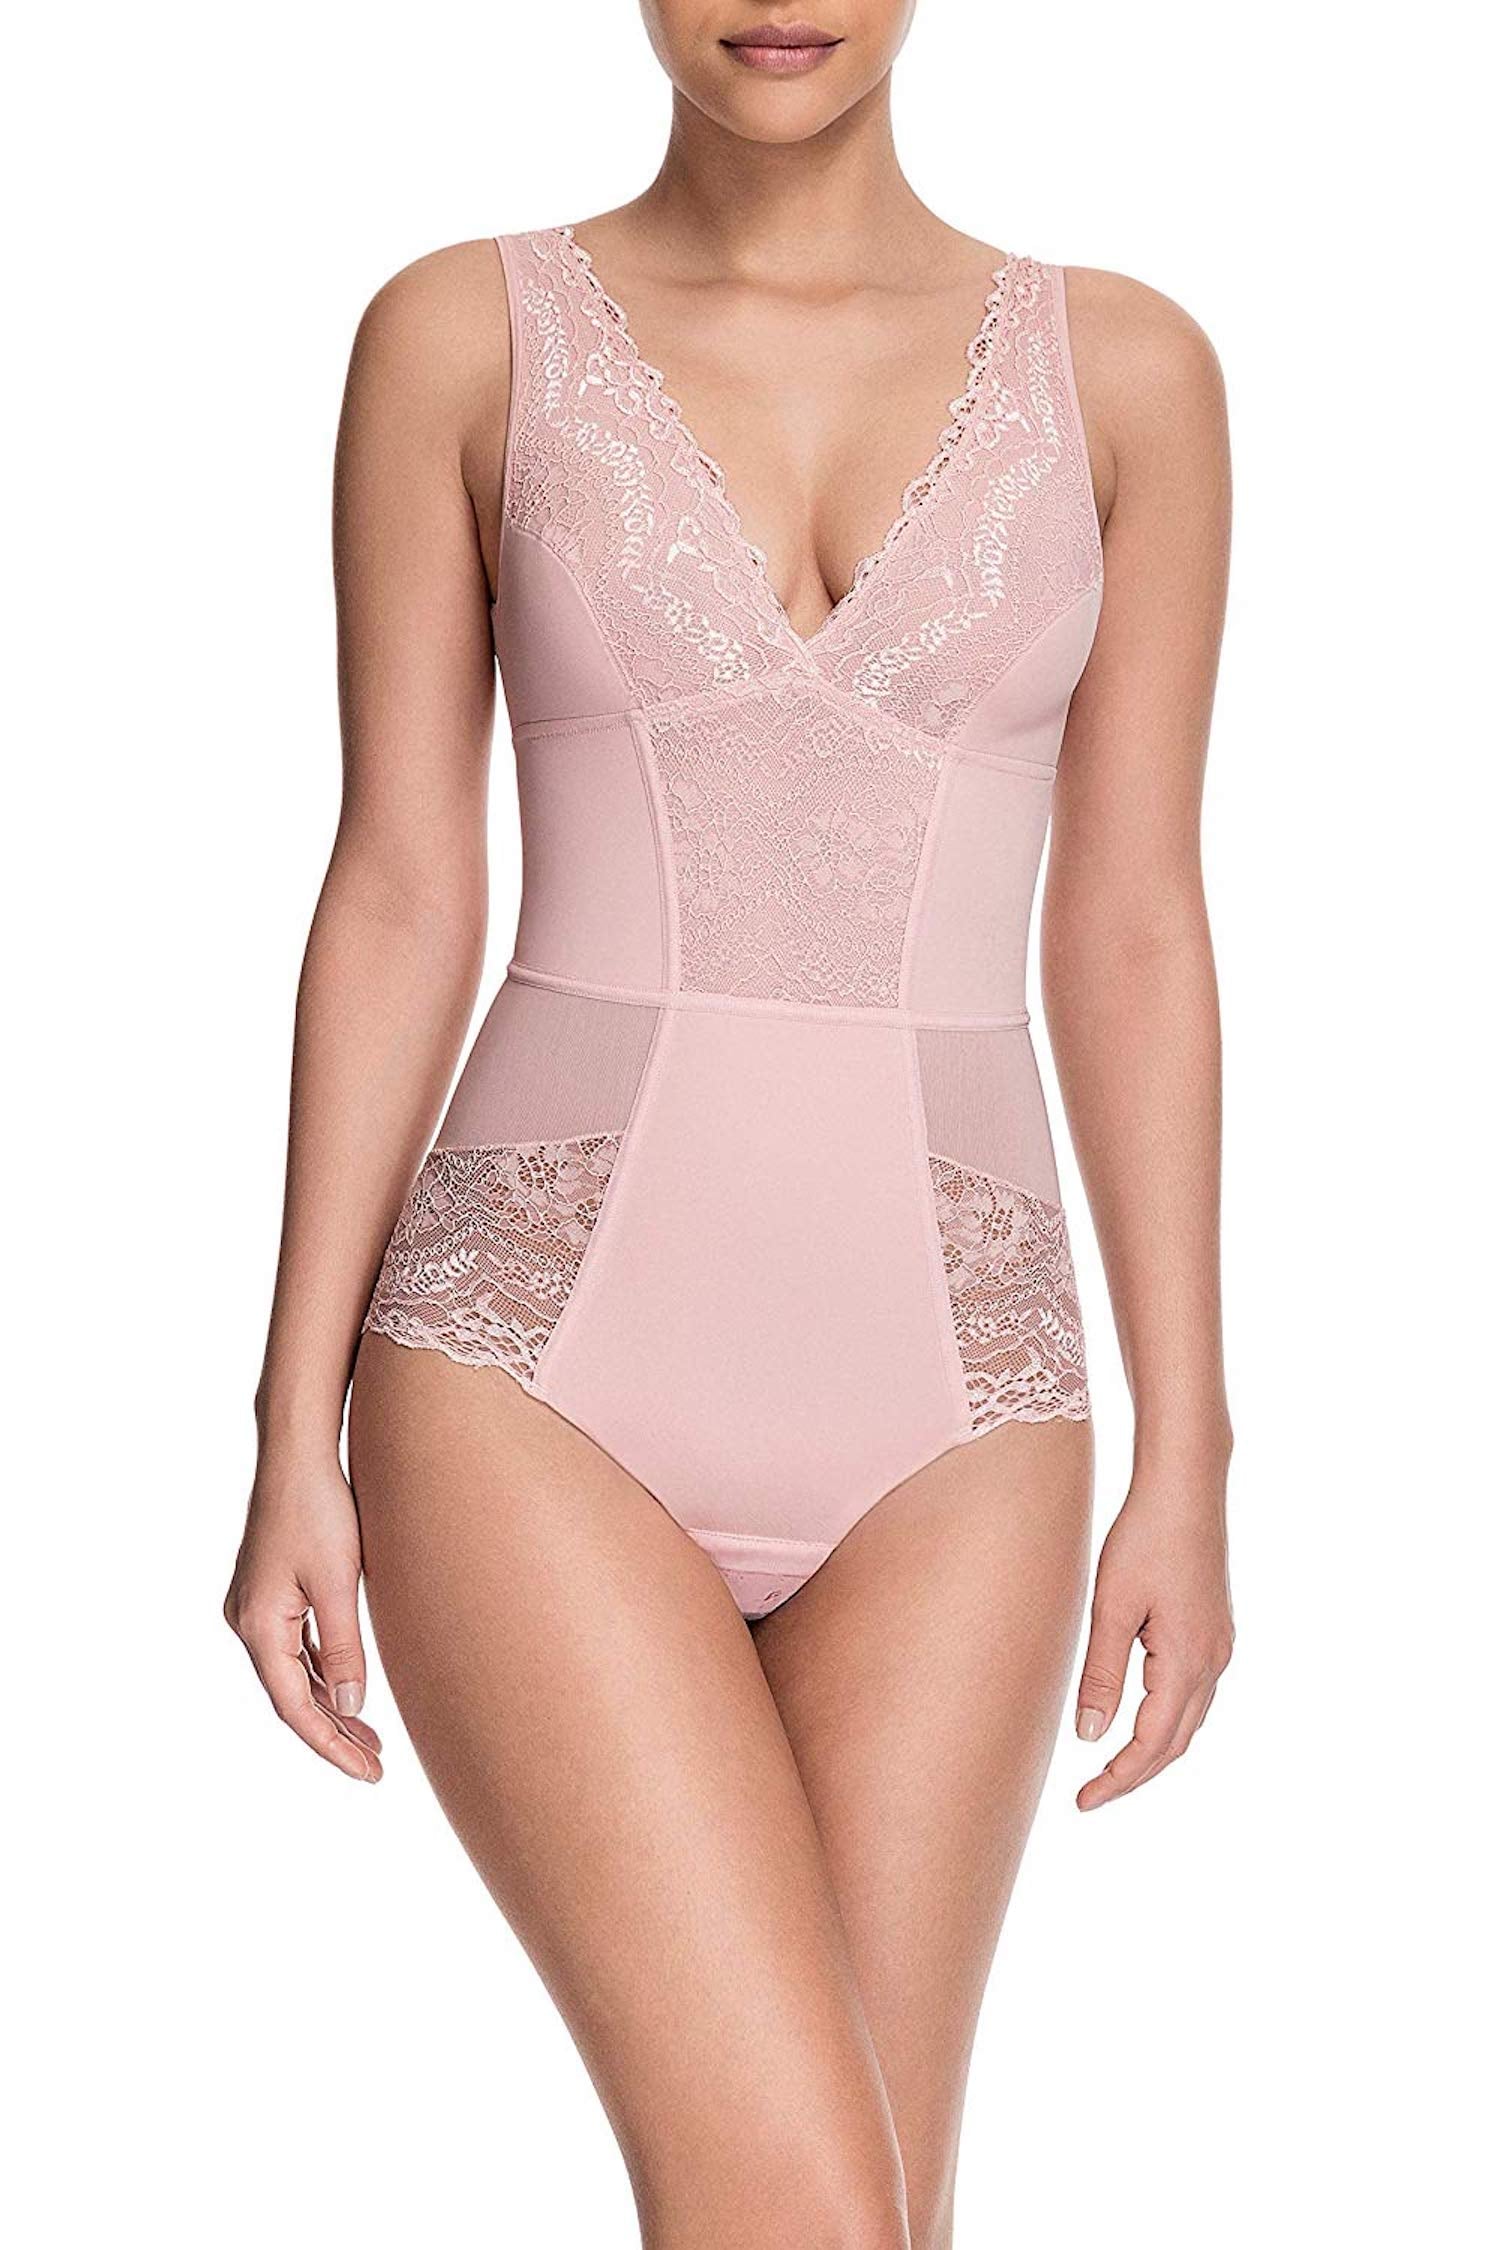 I've Tried 50+ Shapewear Bodysuits, but These Are the 7 Most